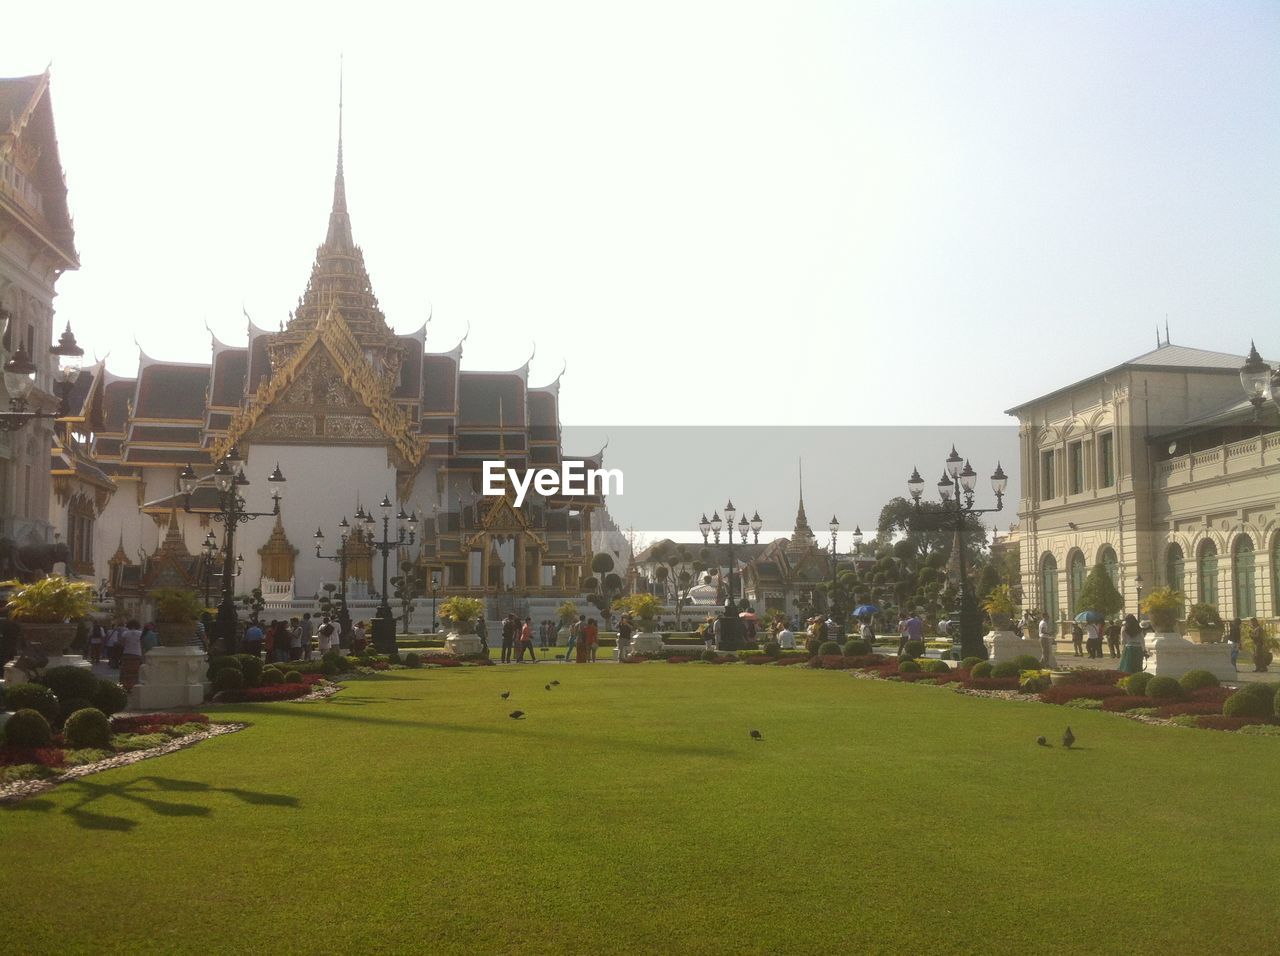 Lawn outside grand palace against clear sky